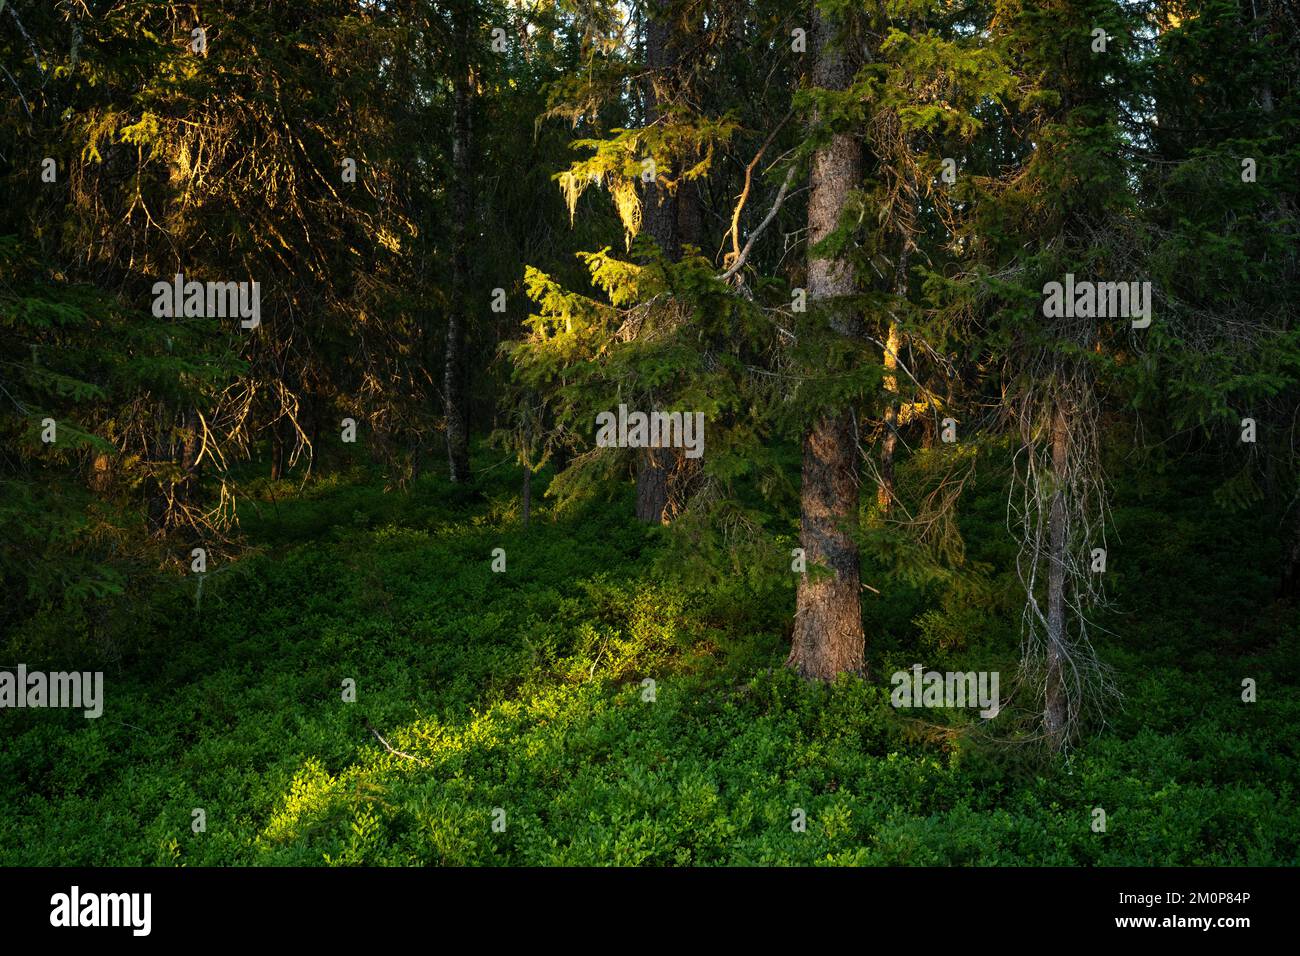 Summery and lush old-growth forest during a sunset near Hossa, Northern Finland Stock Photo